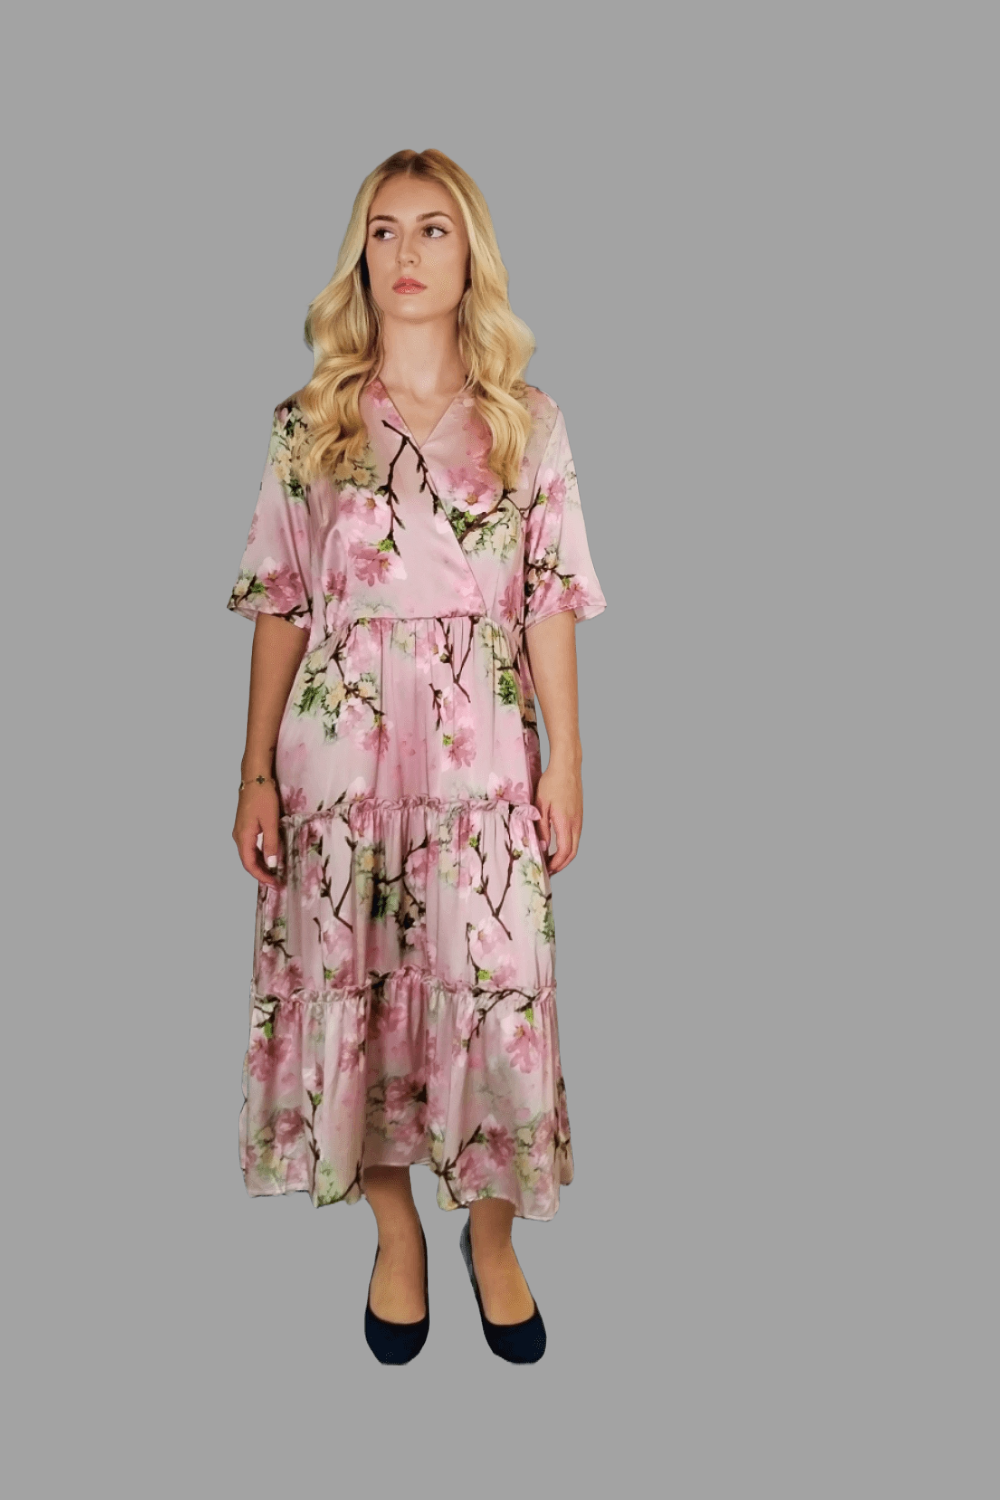 Mulberry Silk Dress in V neck with Pleating Details featuring Cherry Blossom Design in Soft Pink